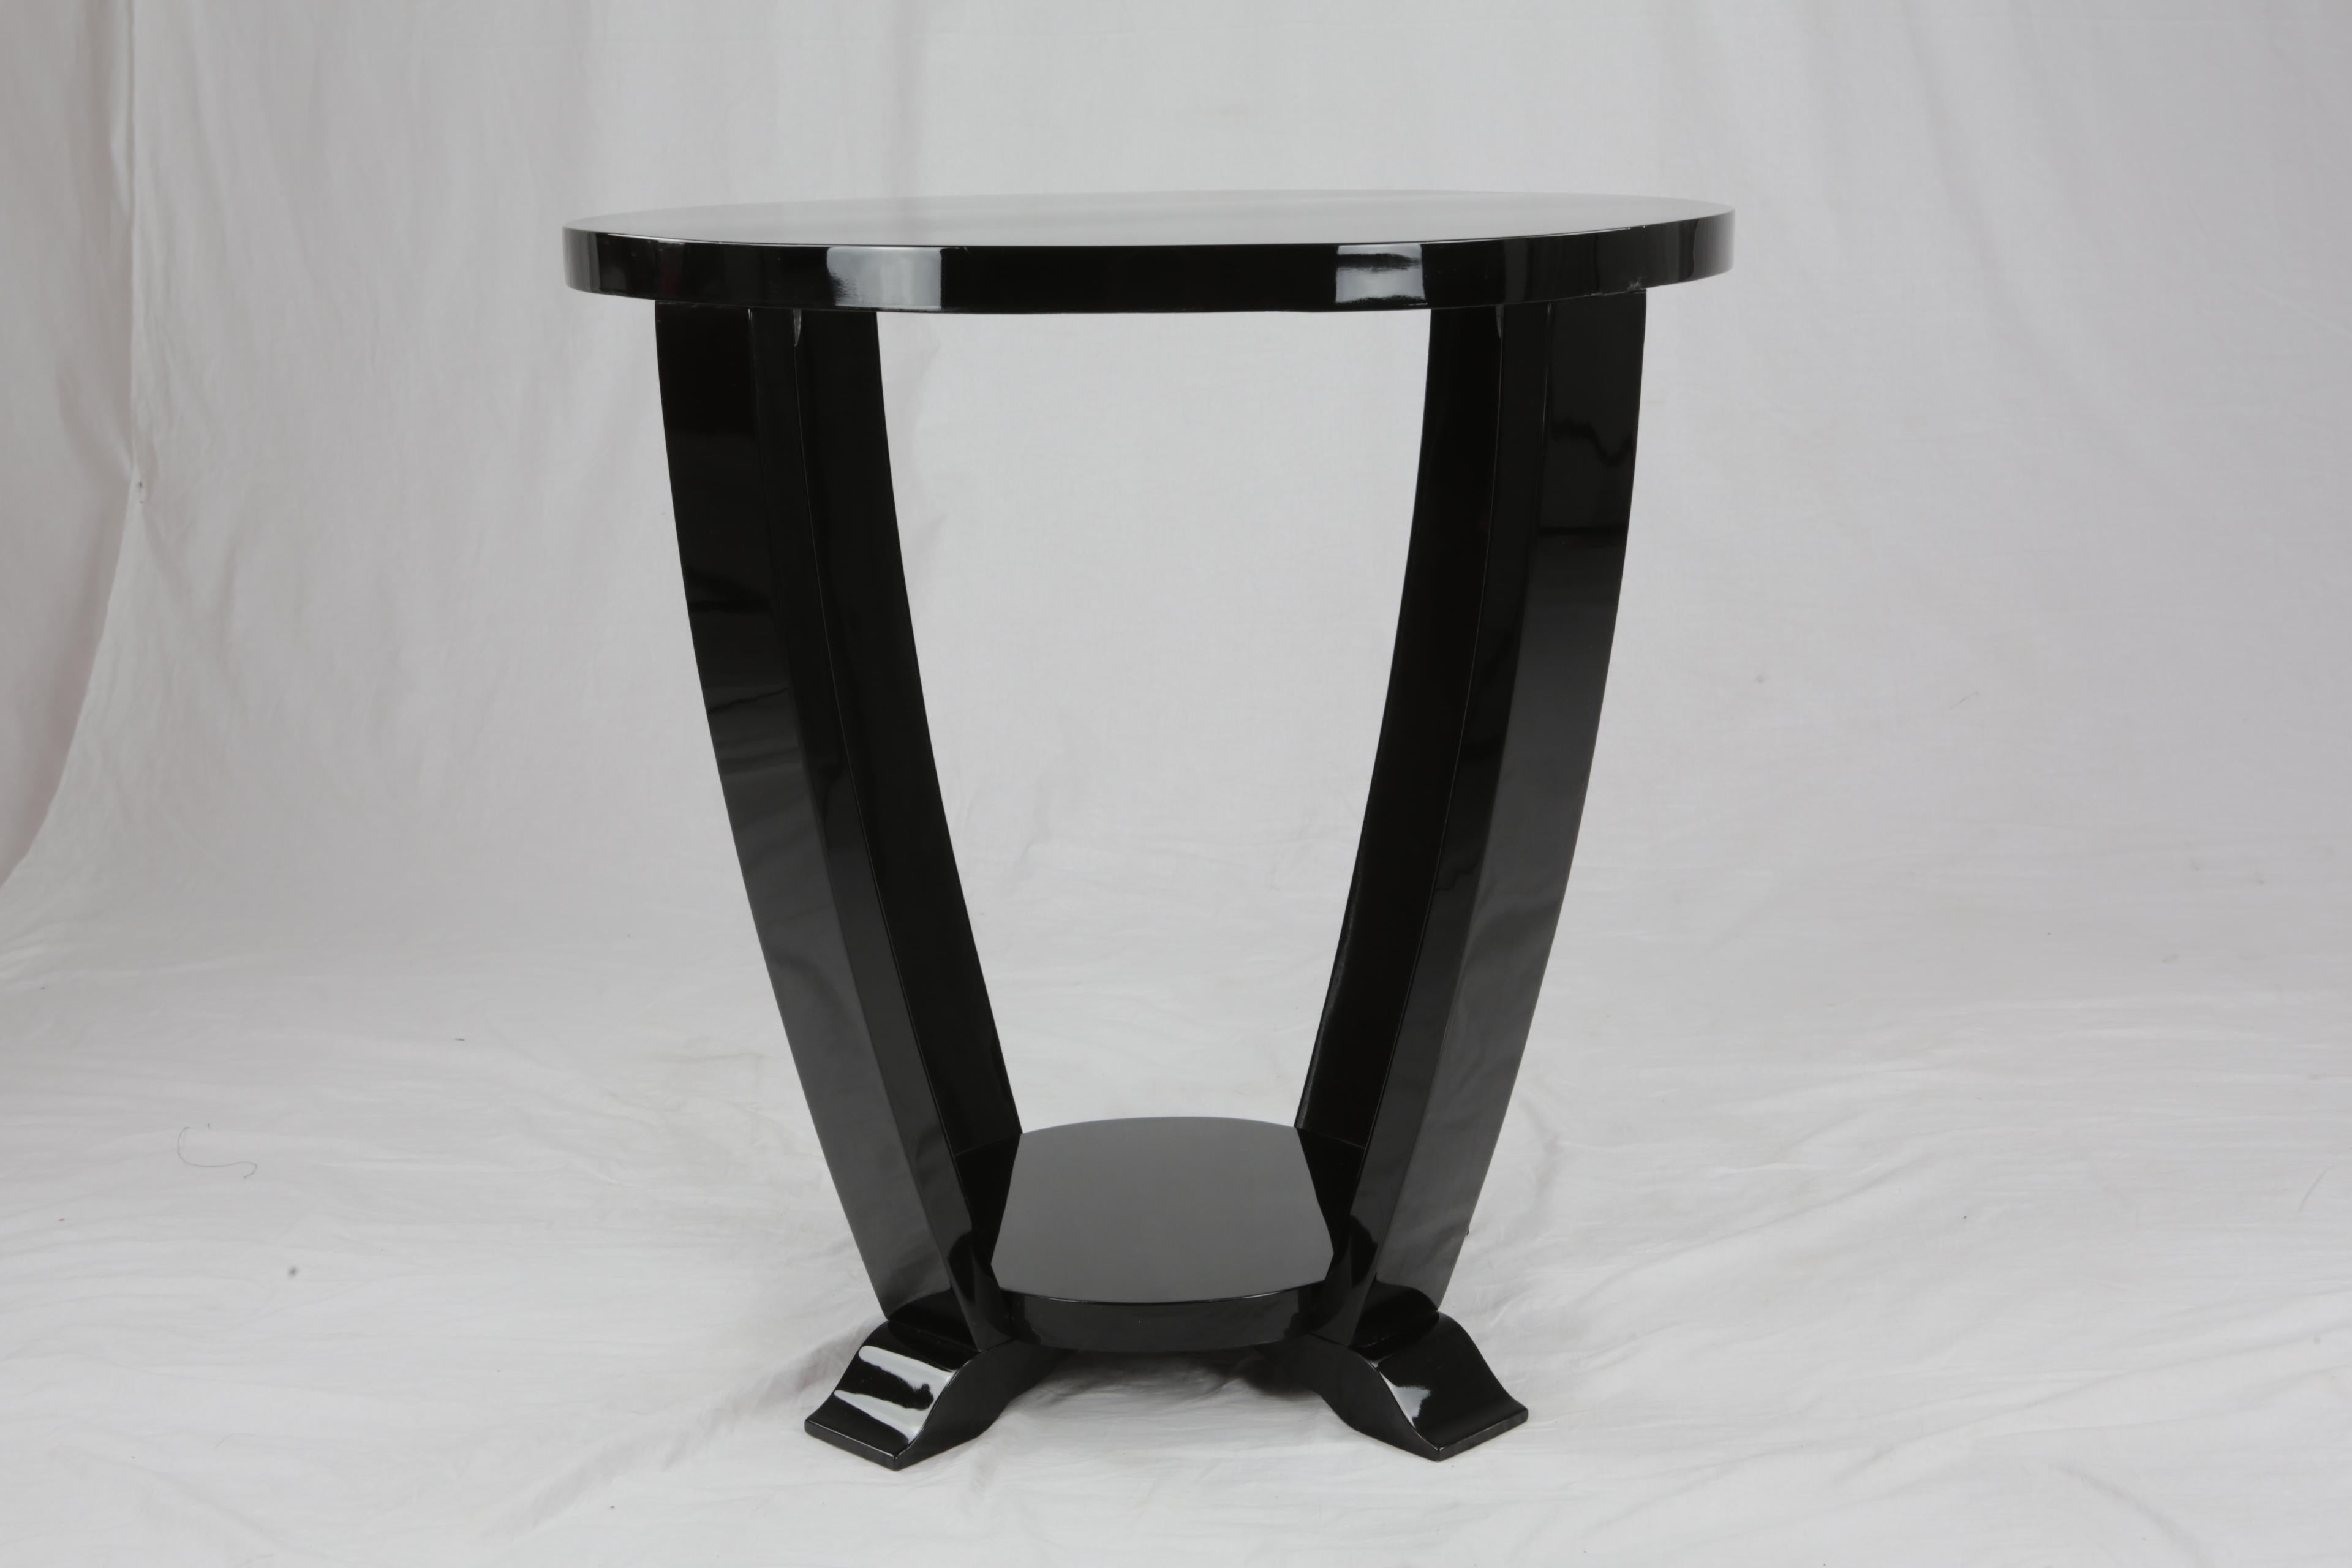 Round French Art Deco side table, circa 1930s, Wood, black lacquered.
The object is in restored condition, new lacquered.